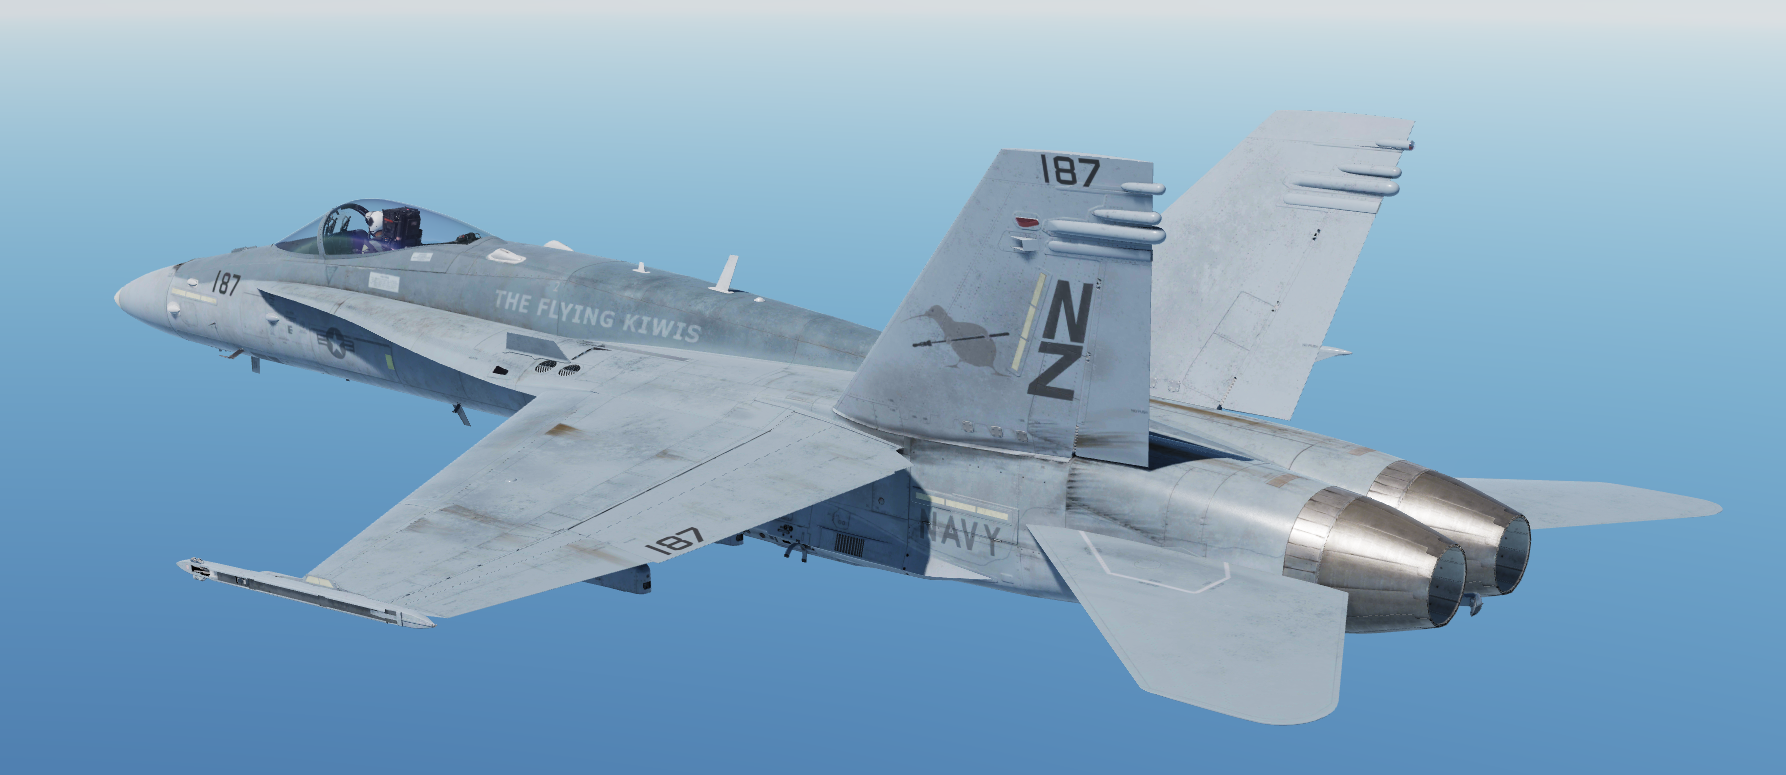 Official "The Flying Kiwis" F/A-18C Low Vis livery by Rhino